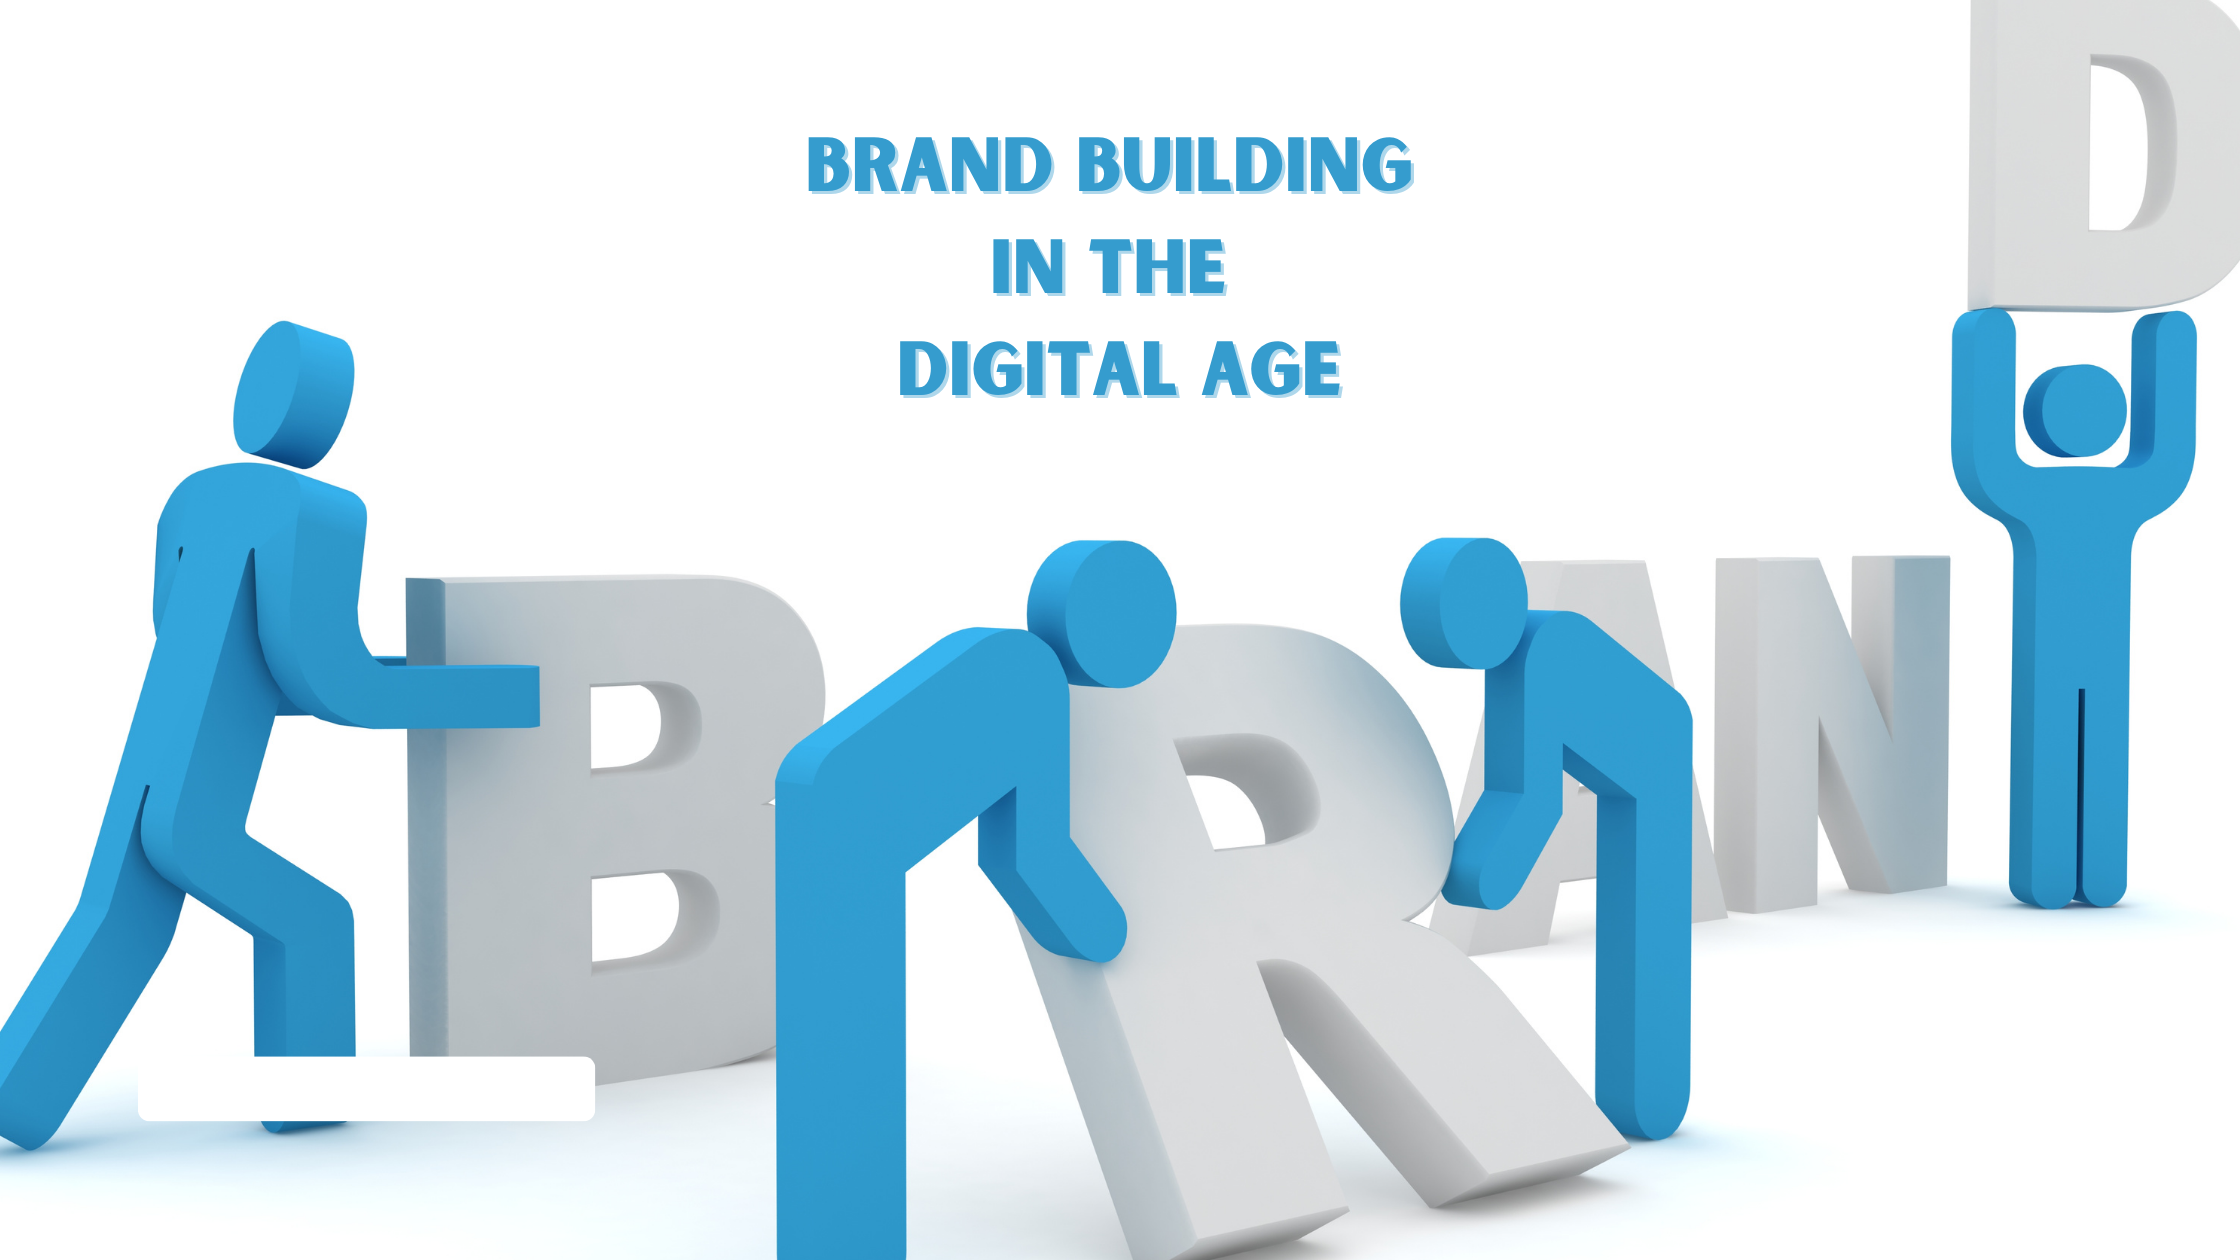 Brand Building Using Digital Marketing: How to Build Your Brand in the Digital Age